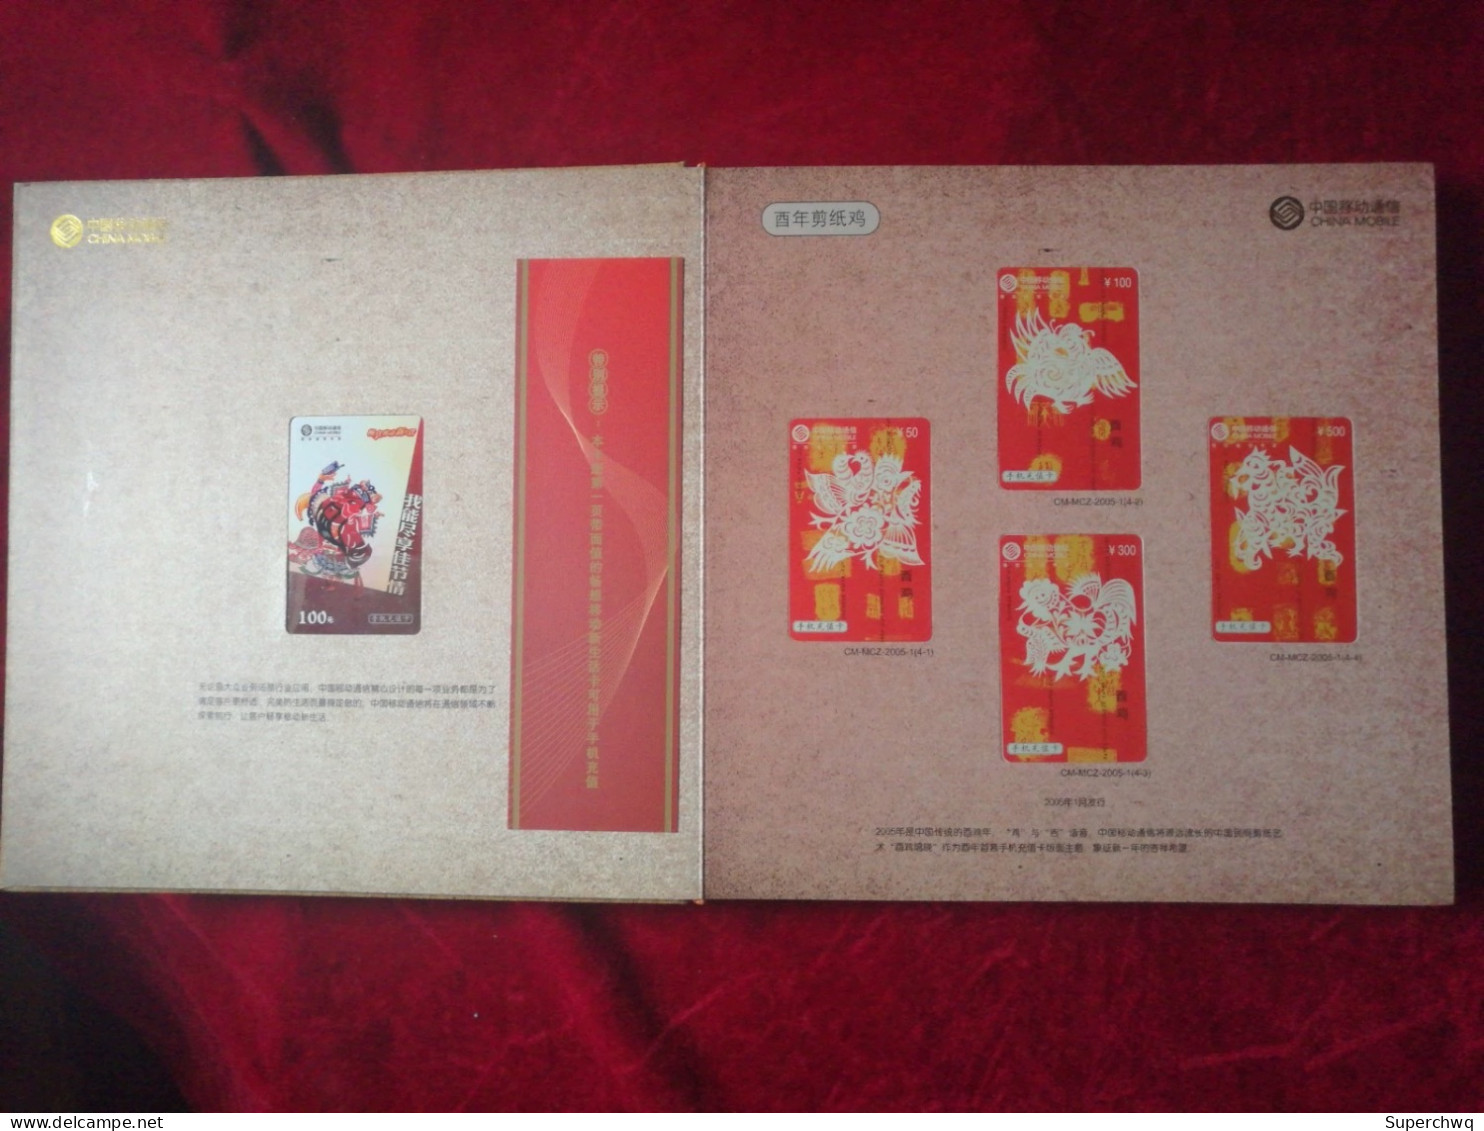 China Mobile's 2005 Business Card Book Includes 57 Cards - China